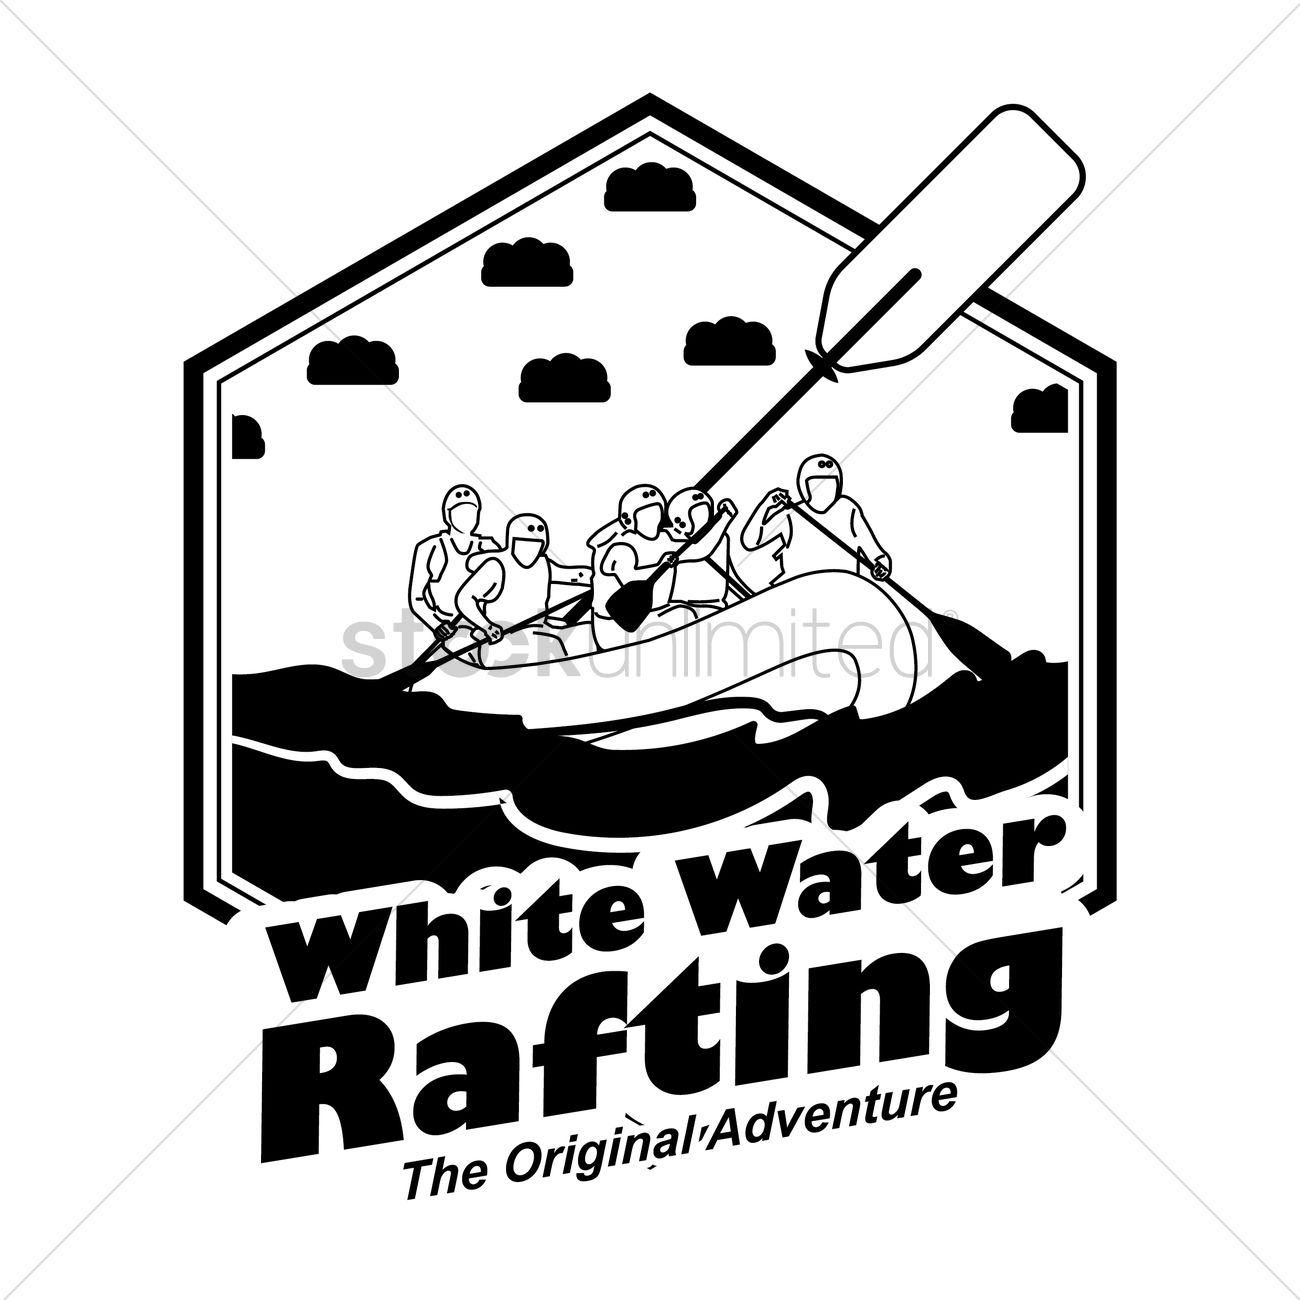 White water rafting label Vector Image.